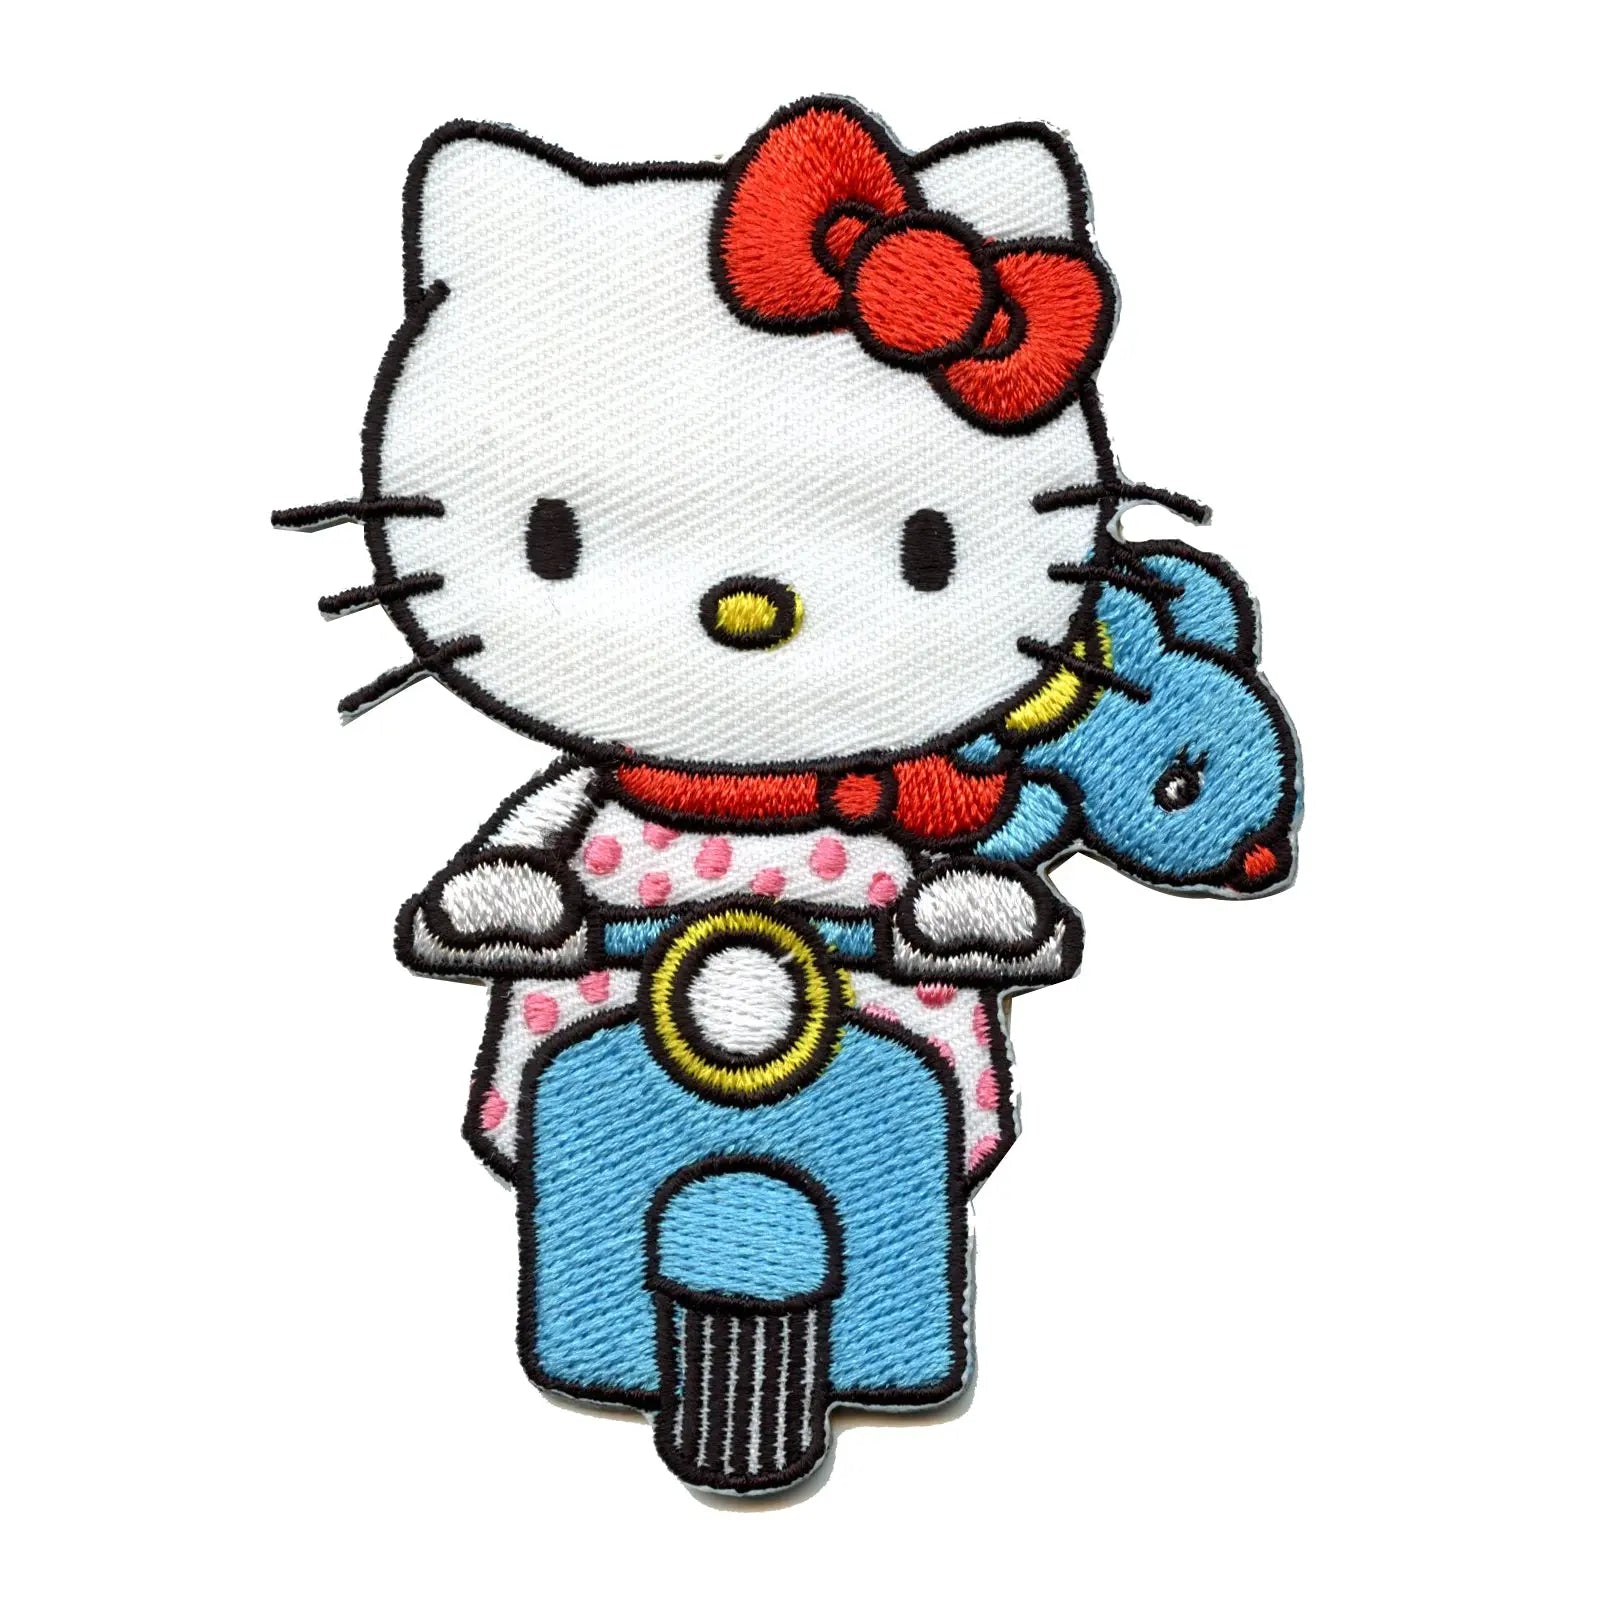 LOT OF 2 CUTE HELLO KITTY IRON ON PATCHES free shipping